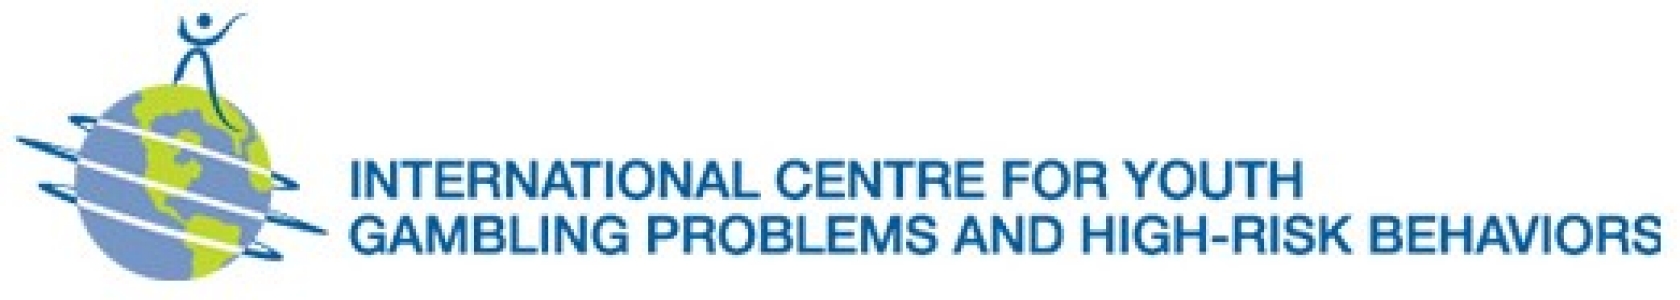 International Centre for Youth Gambling Problems and High-Risk Behavior